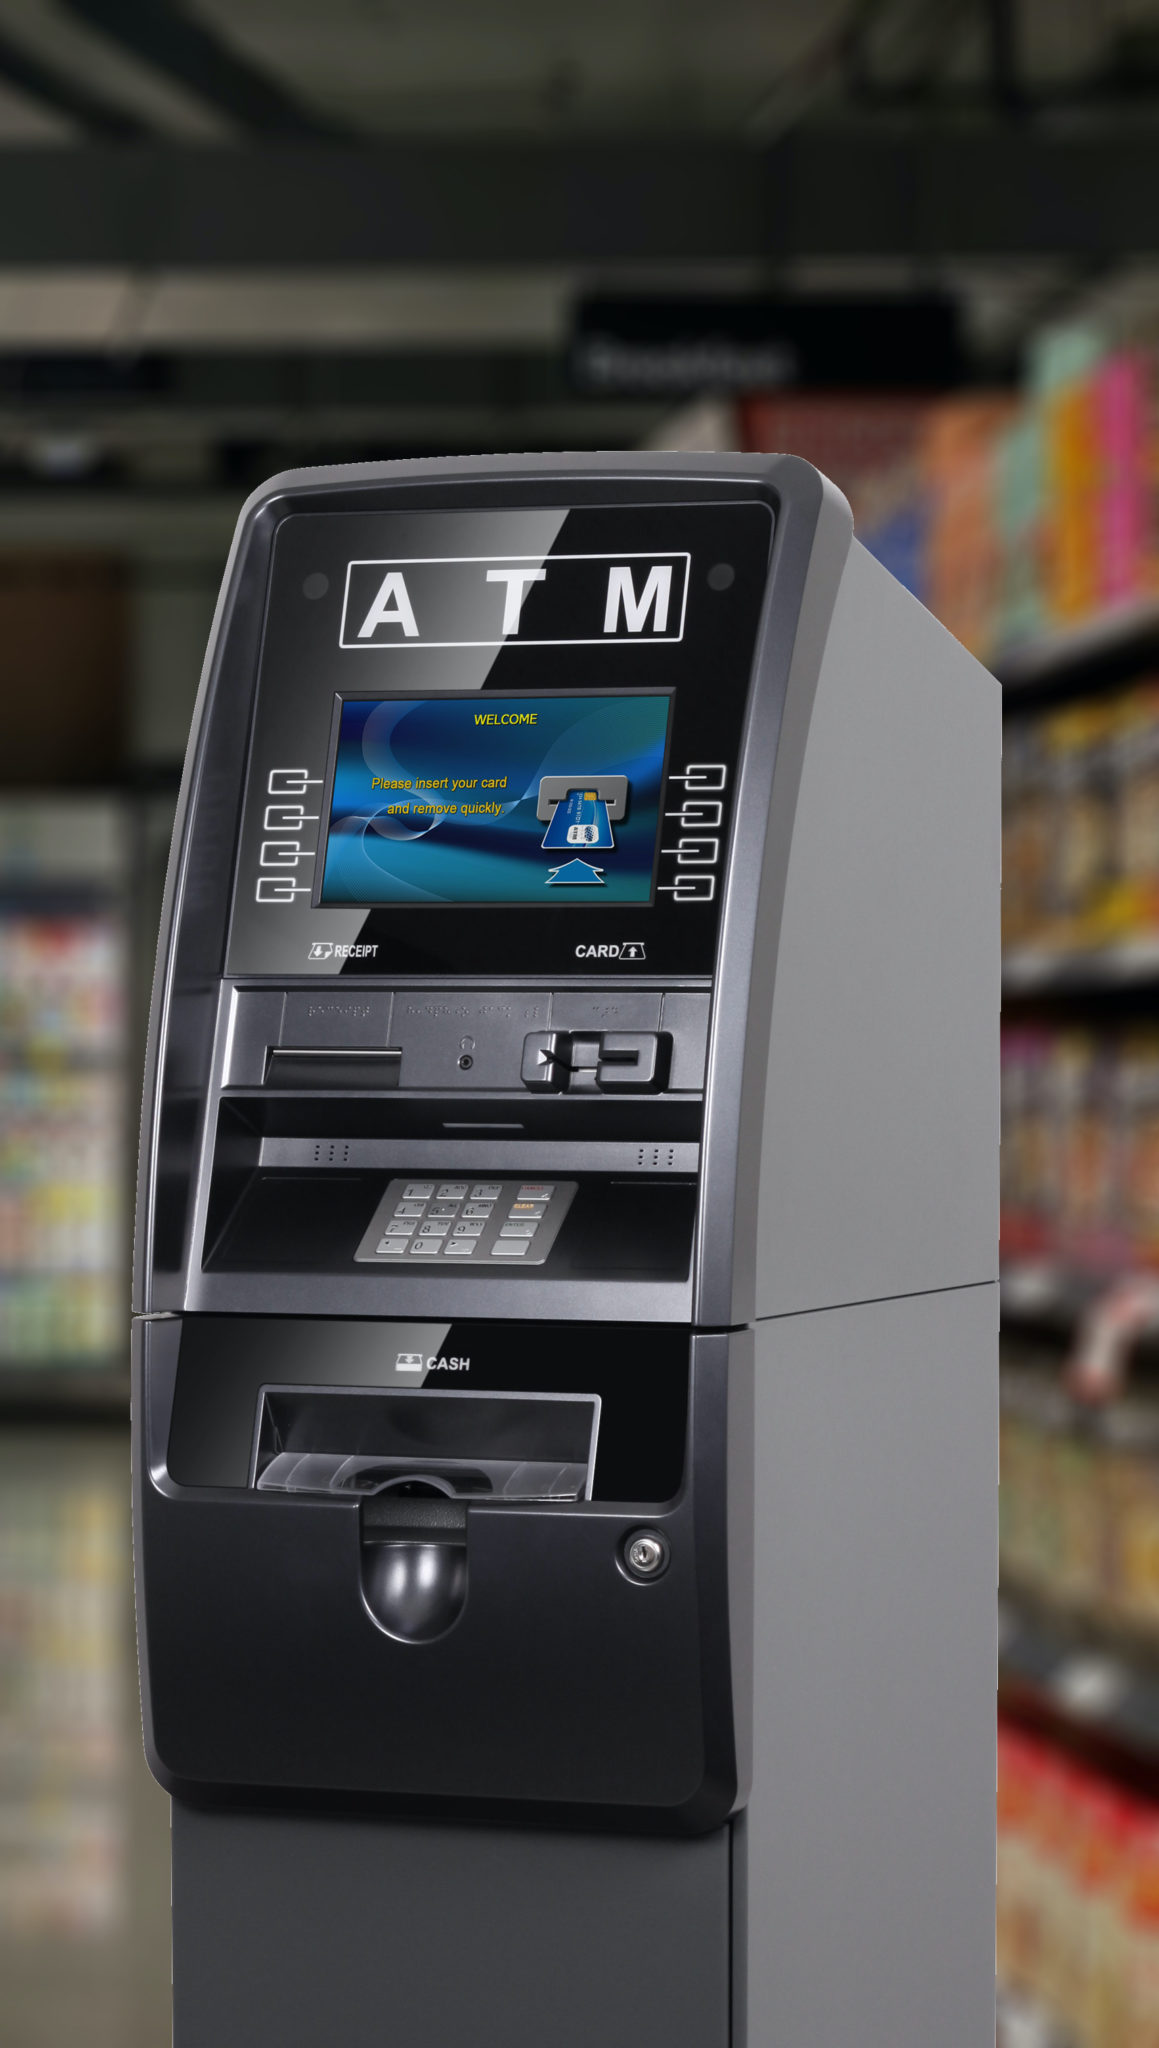 Northern California ATM Supplier, ATM Products, ATM Services, ATM Products North California, BUY an ATM for your business, Best ATM equipment, ATM Placement, Purchase your ATM, ATM Partnership in North California